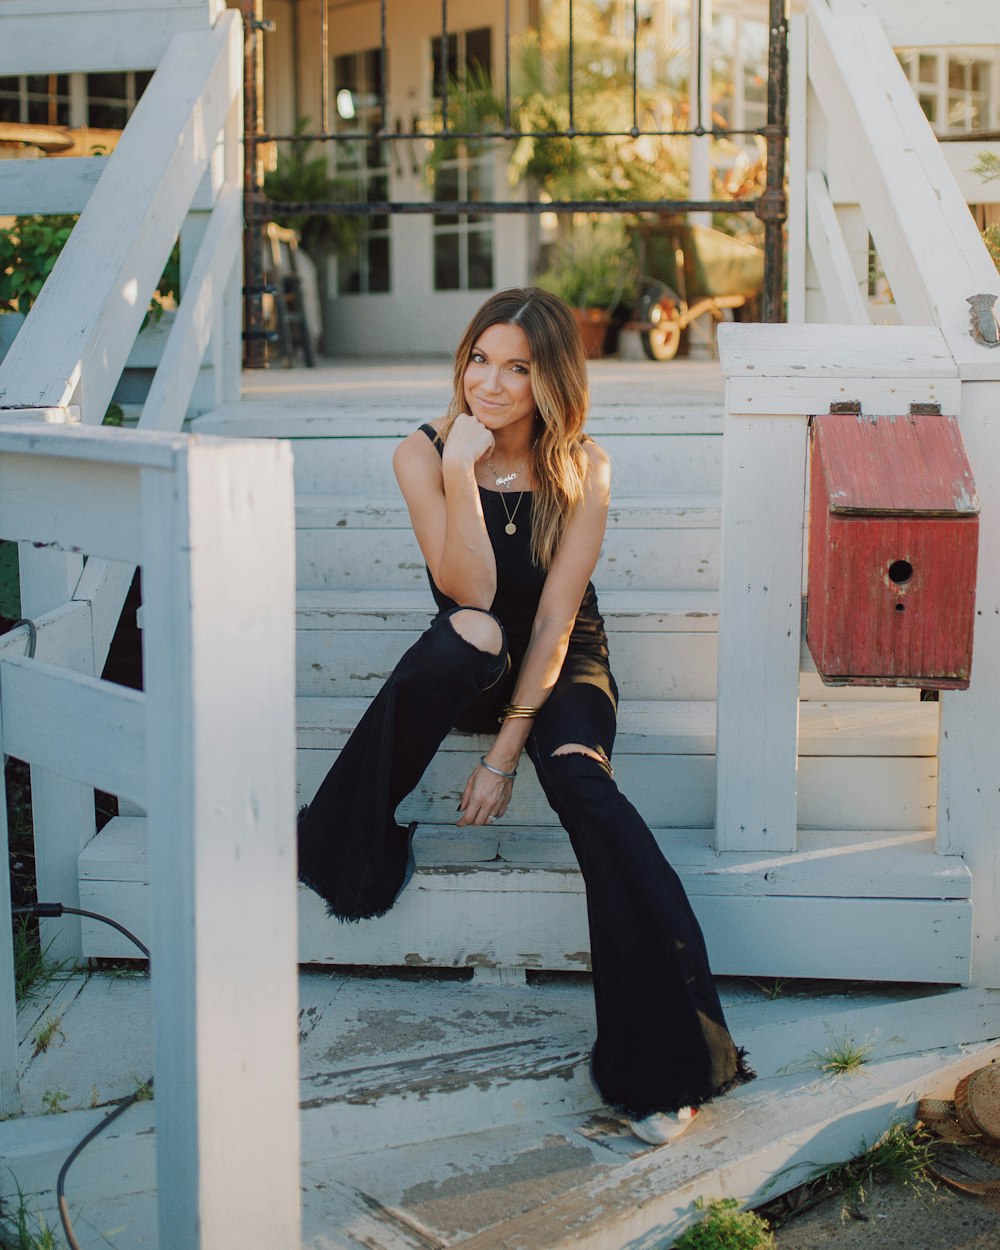 woman in black tank top and black pants sitting on white wooden bench during daytime